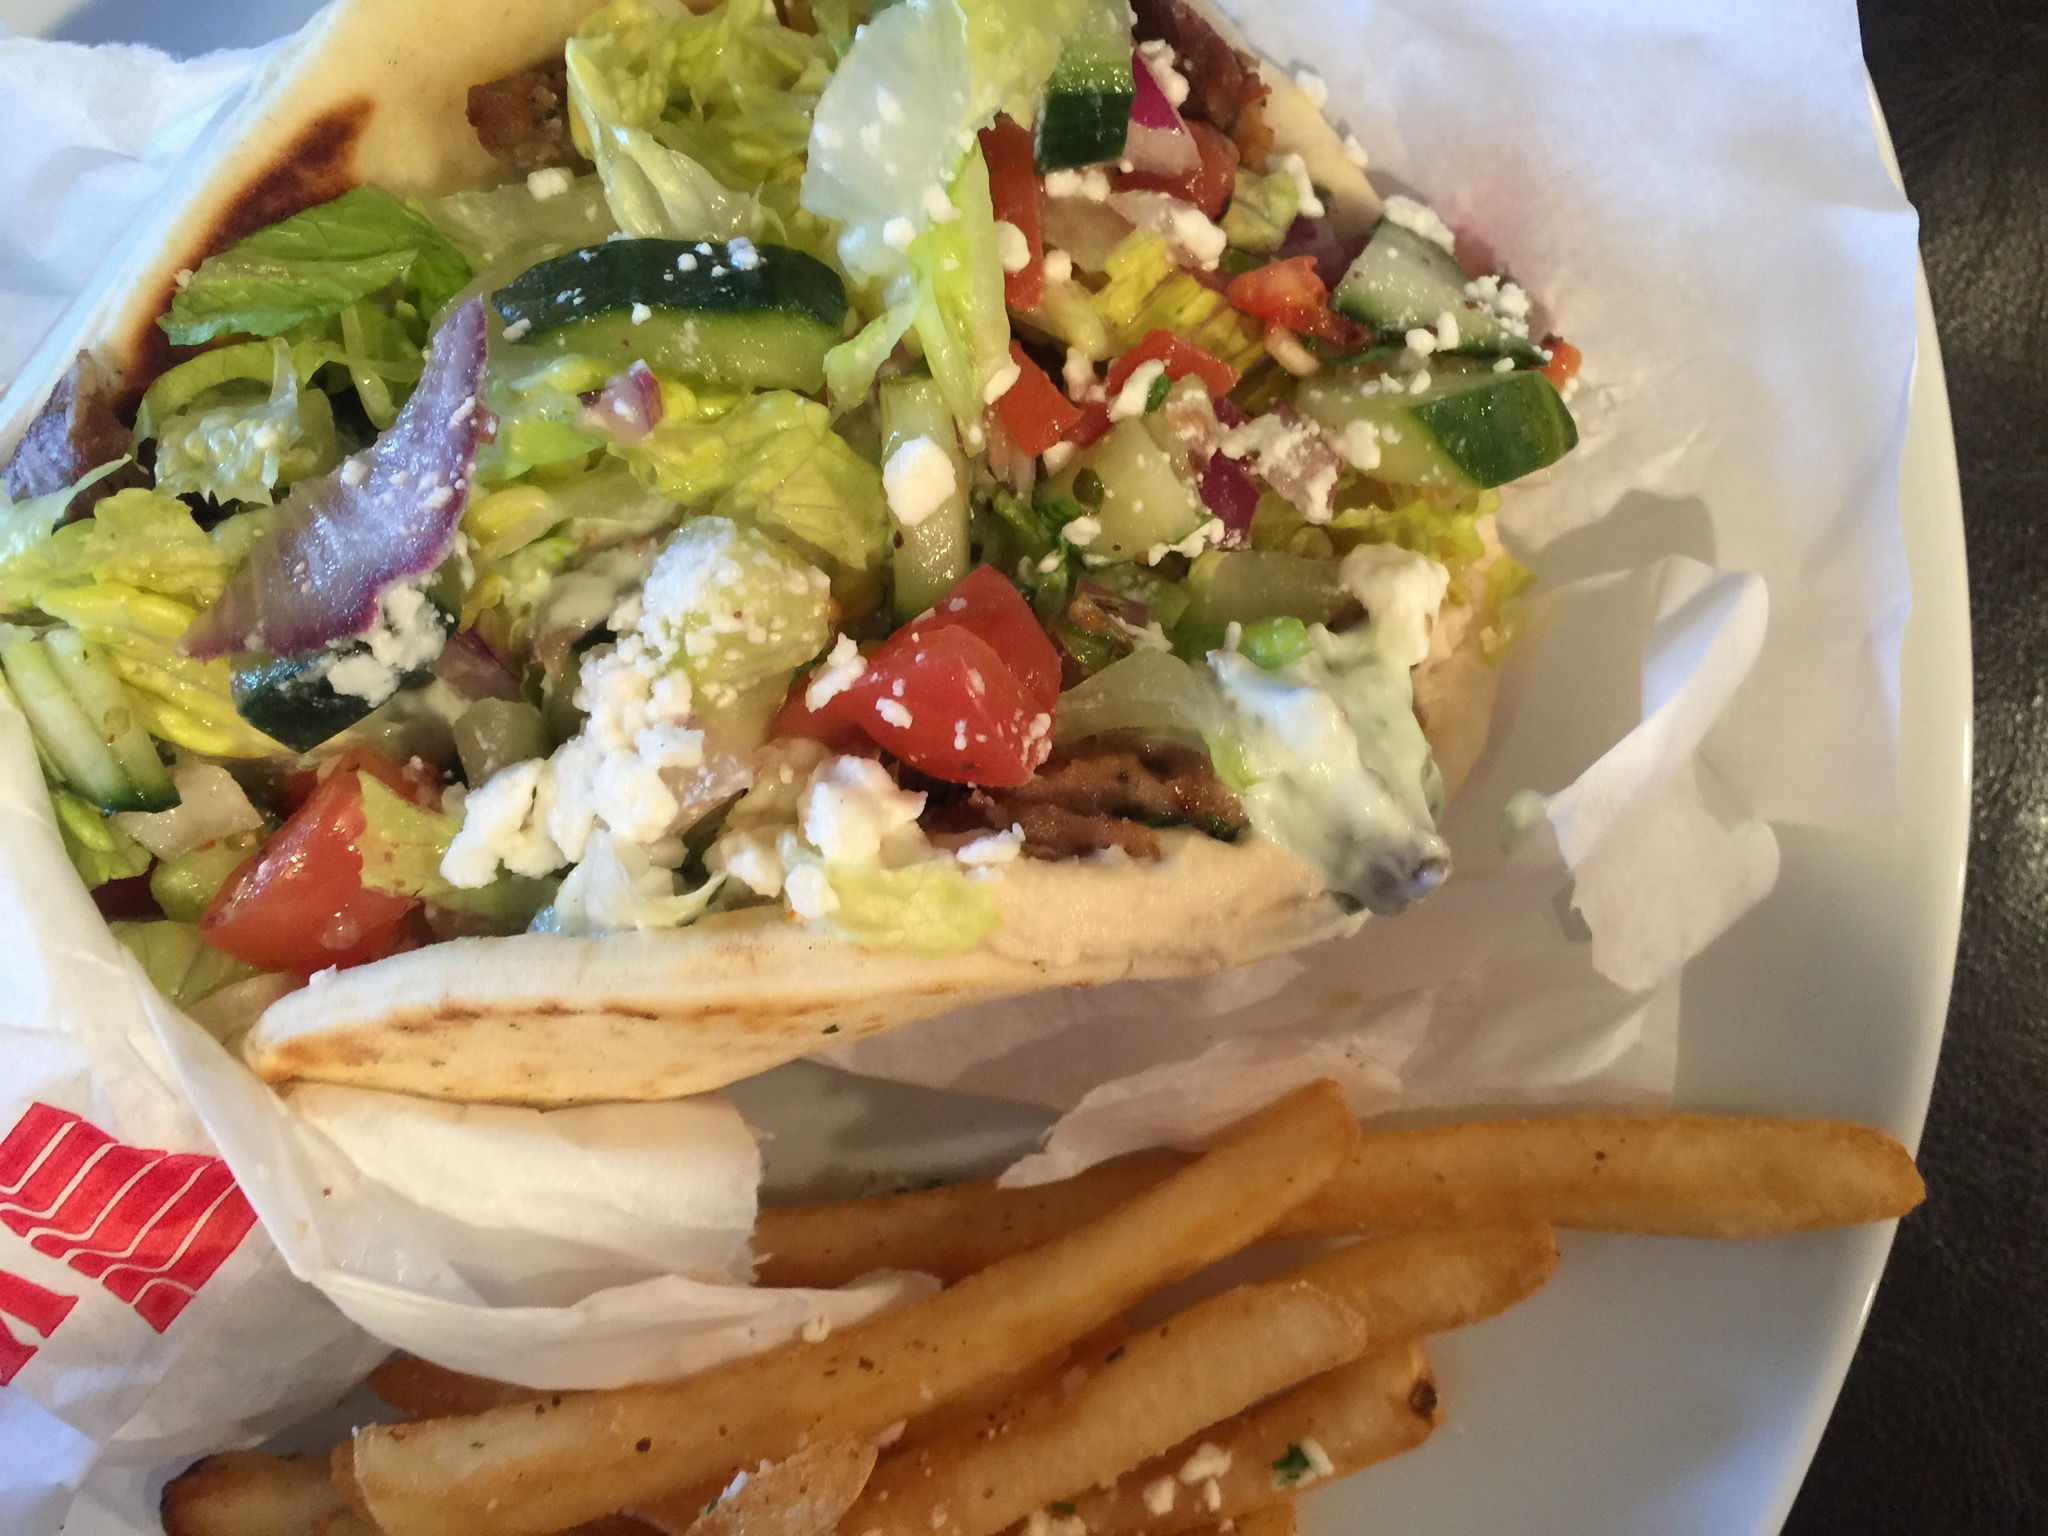 Gyro and Greek fries at Gyro Stop in Mukilteo are worth a stop.